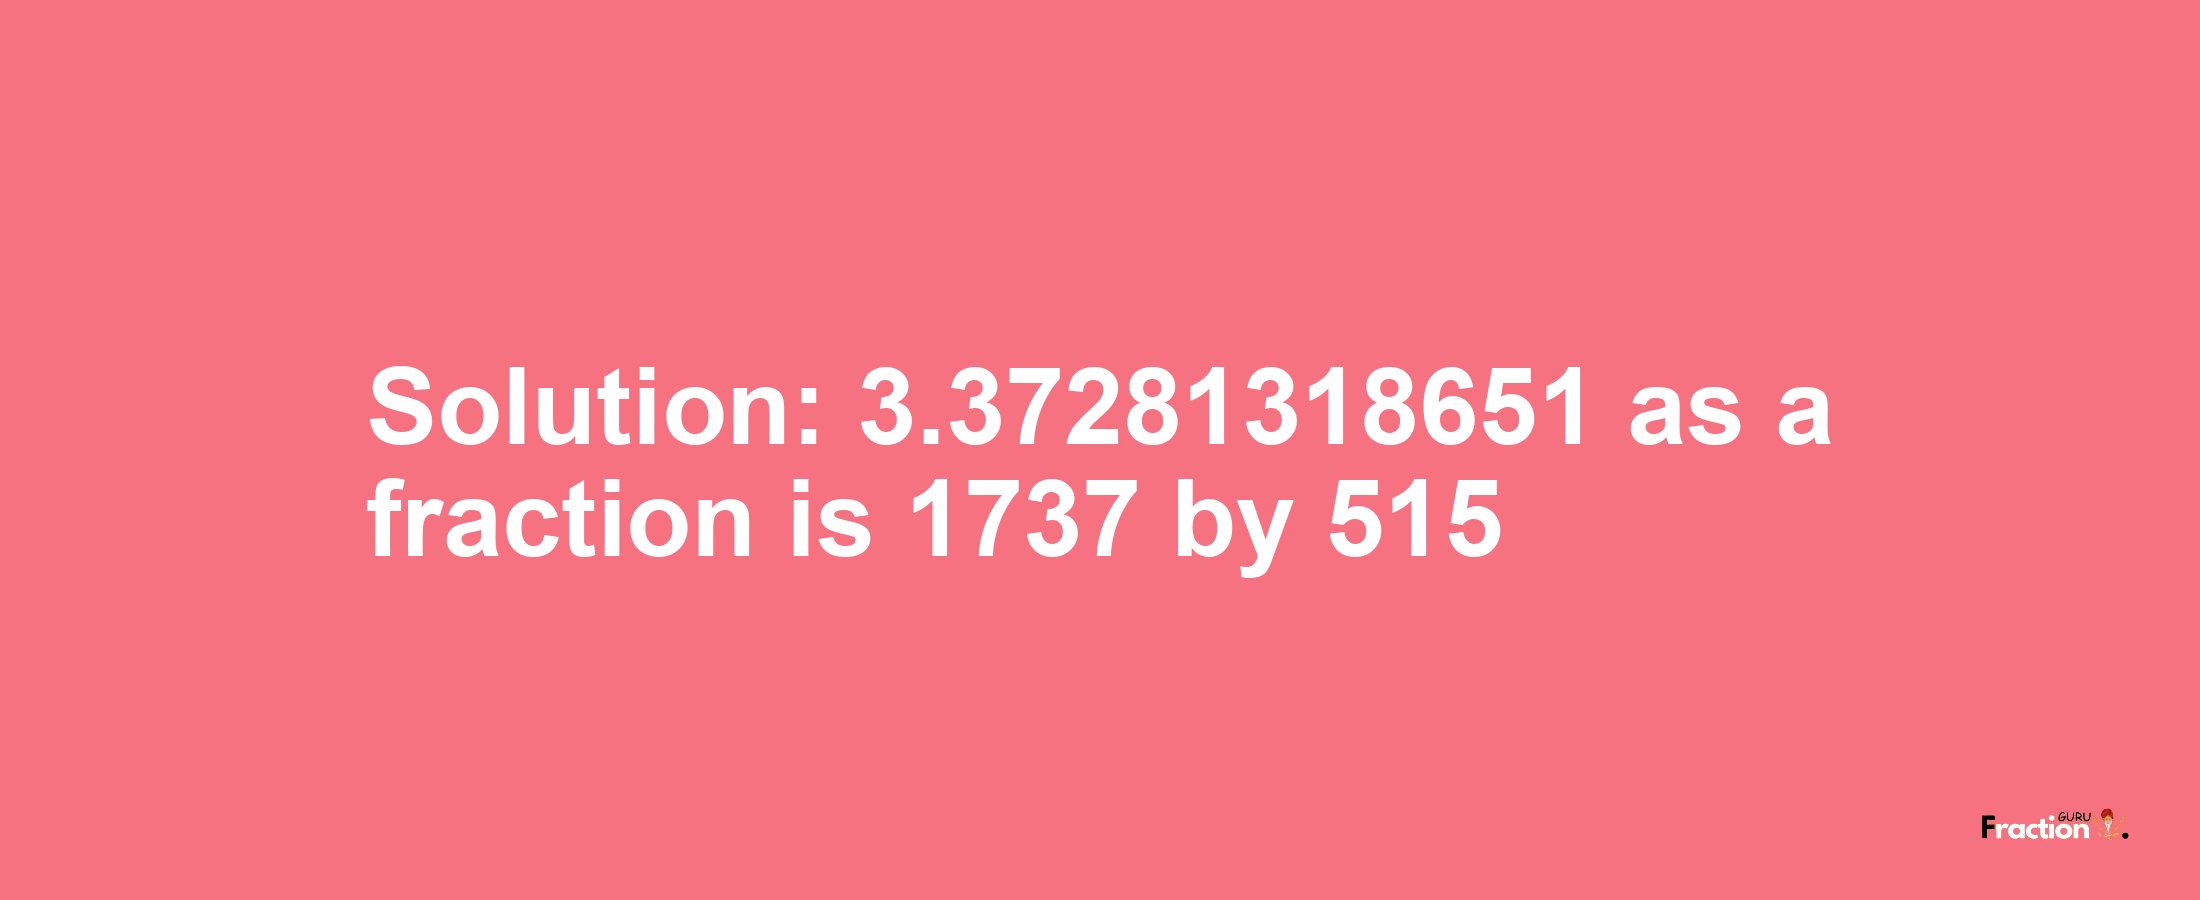 Solution:3.37281318651 as a fraction is 1737/515